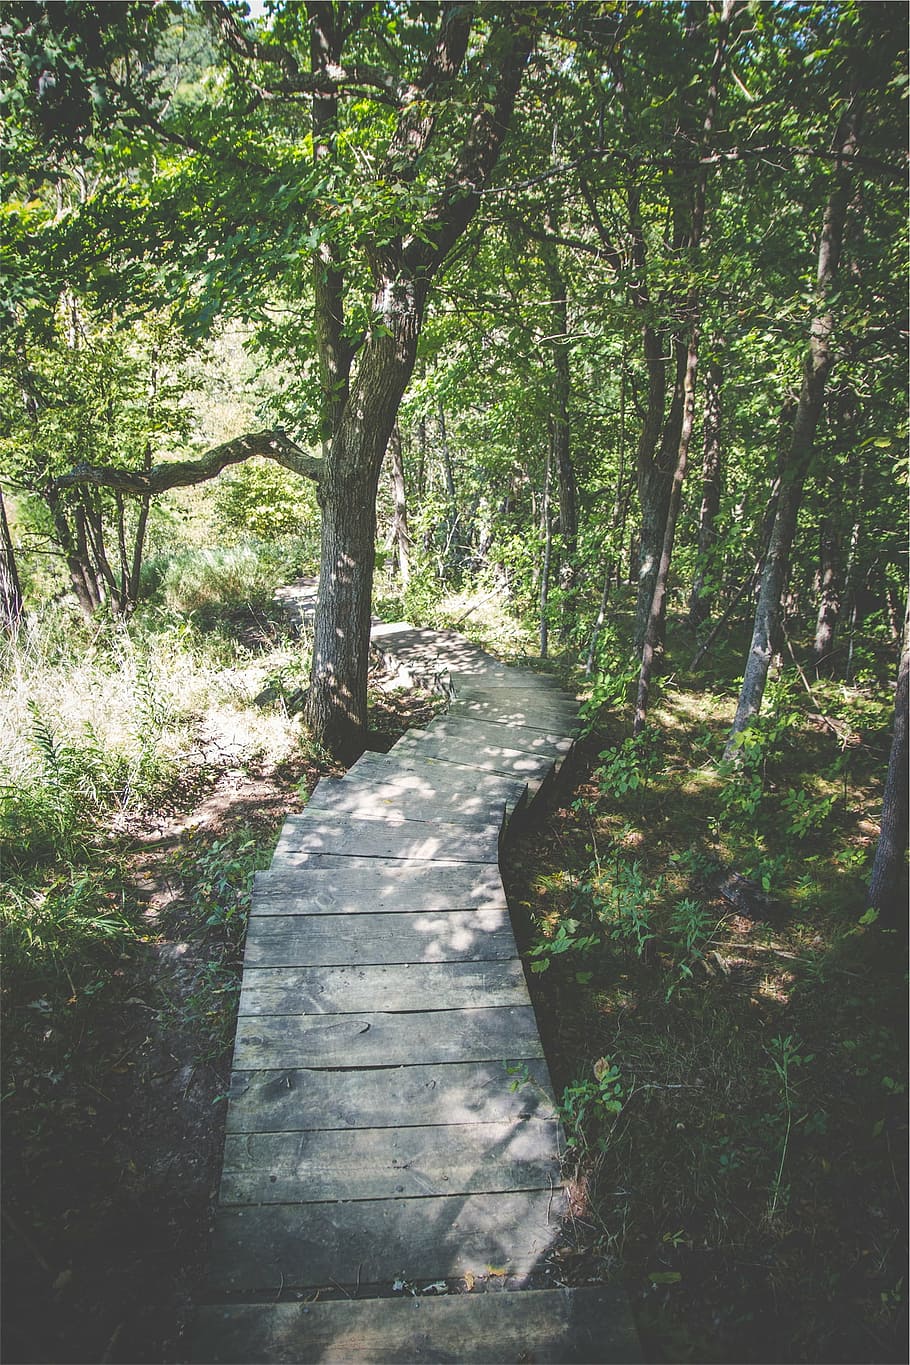 grey, wooden, forest trail, stair, pathway, shade, trees, wood, path, trail